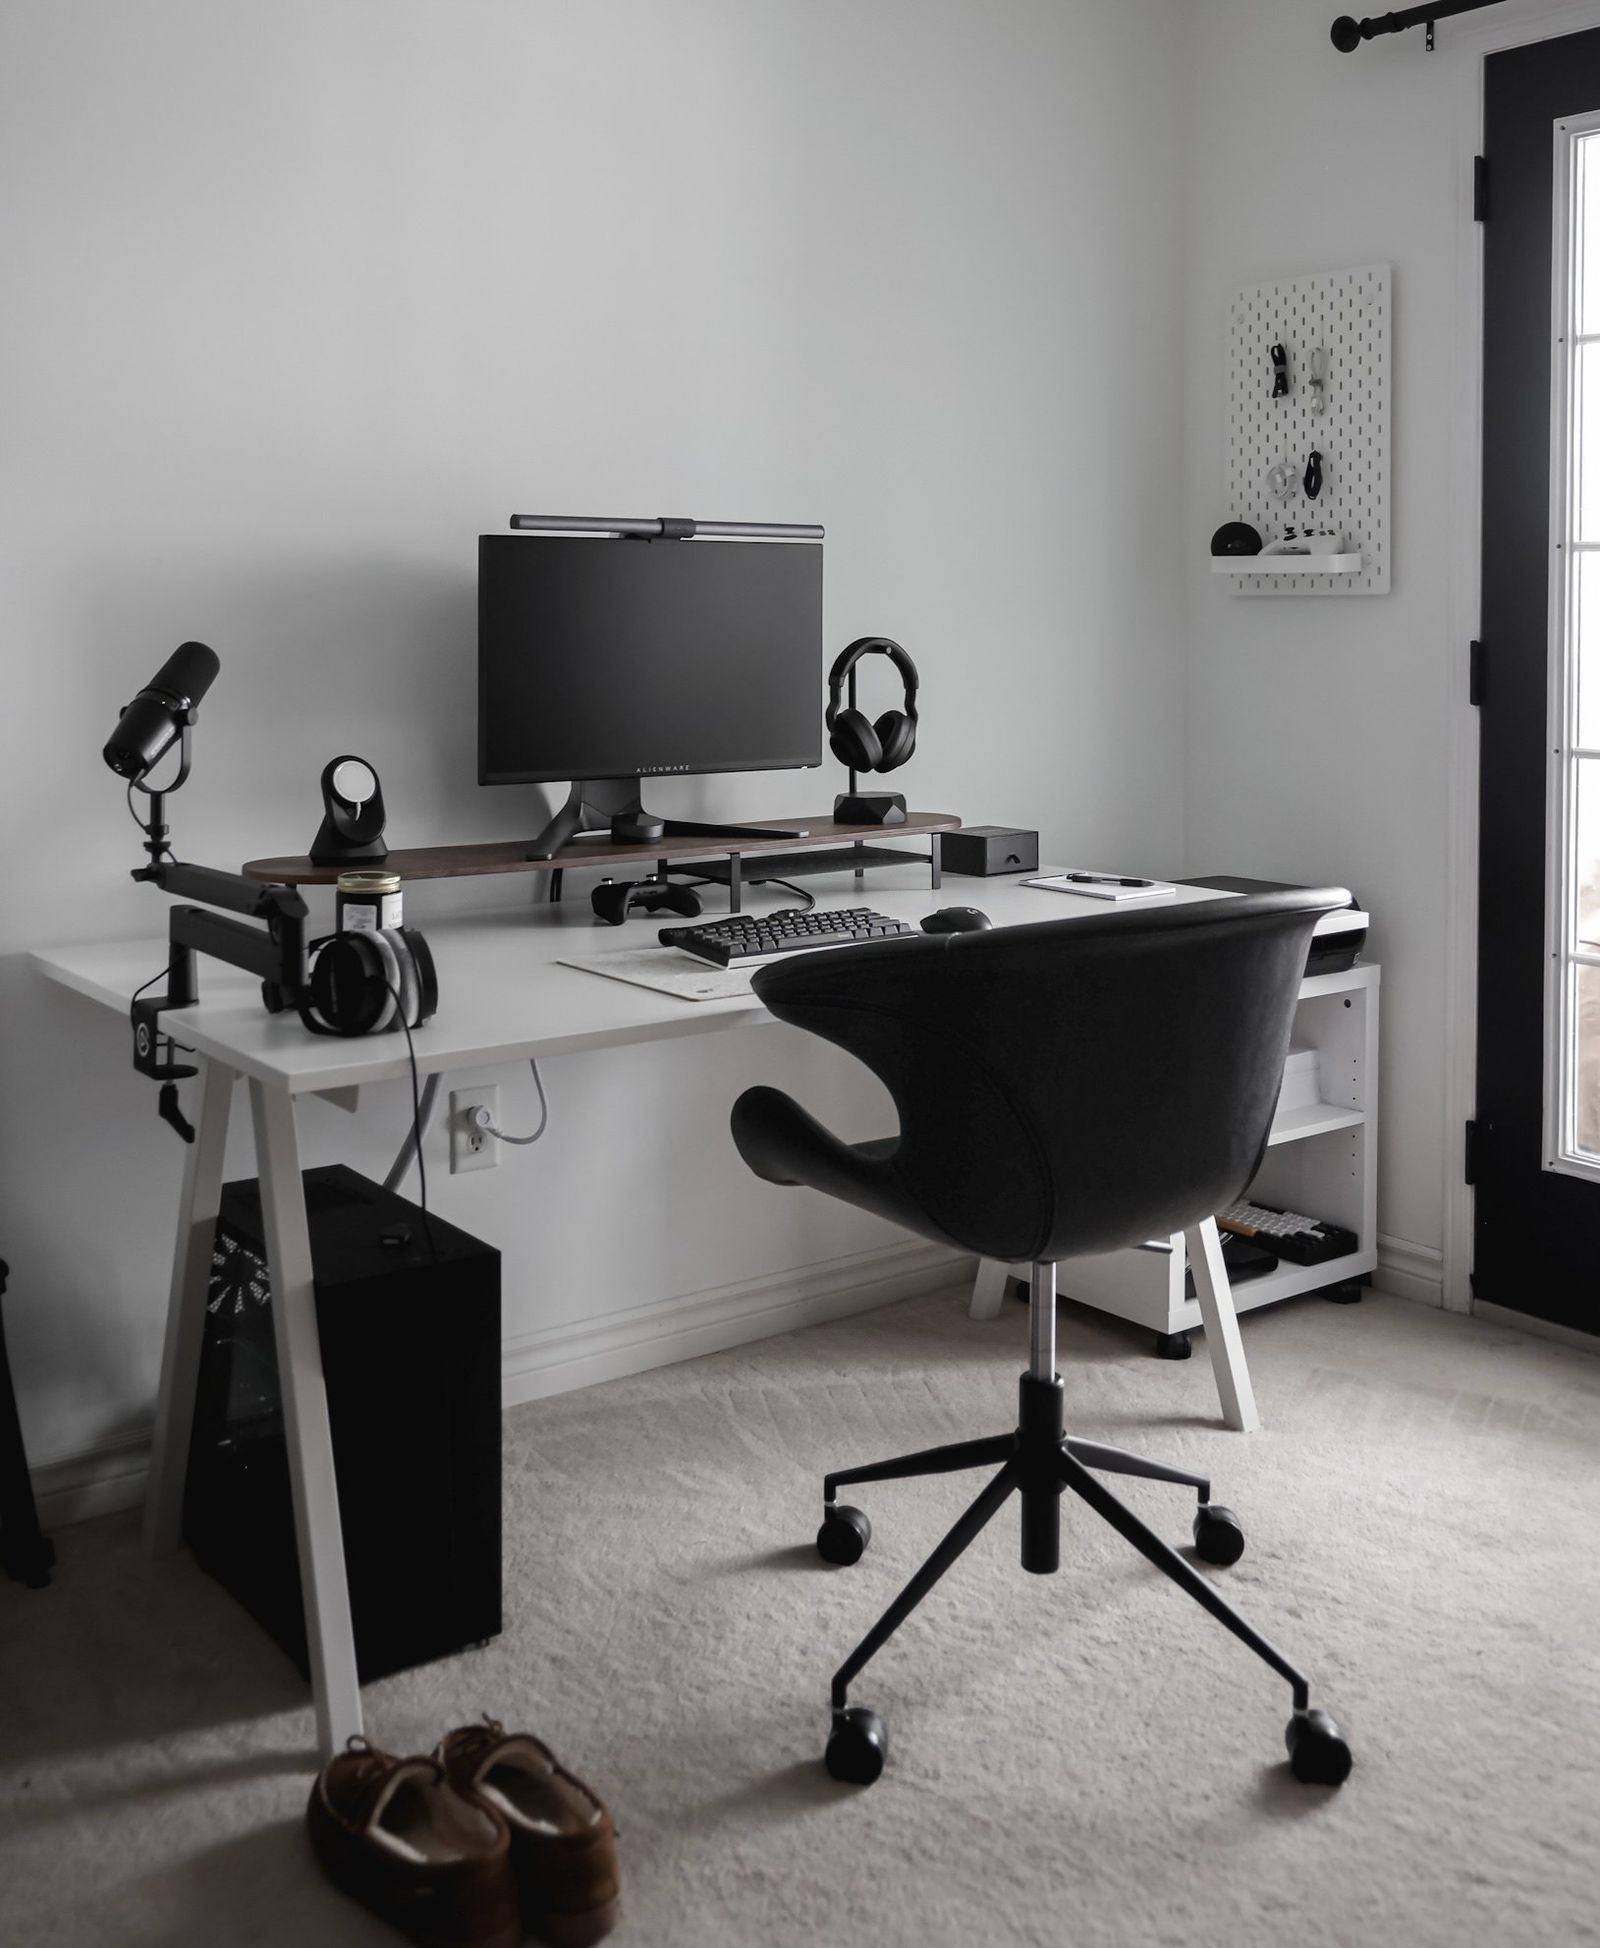 A minimalist home office featuring a white desk, black ergonomic chair, computer monitor, microphone, headphones, and a pegboard with neatly hung accessories against a light grey wall